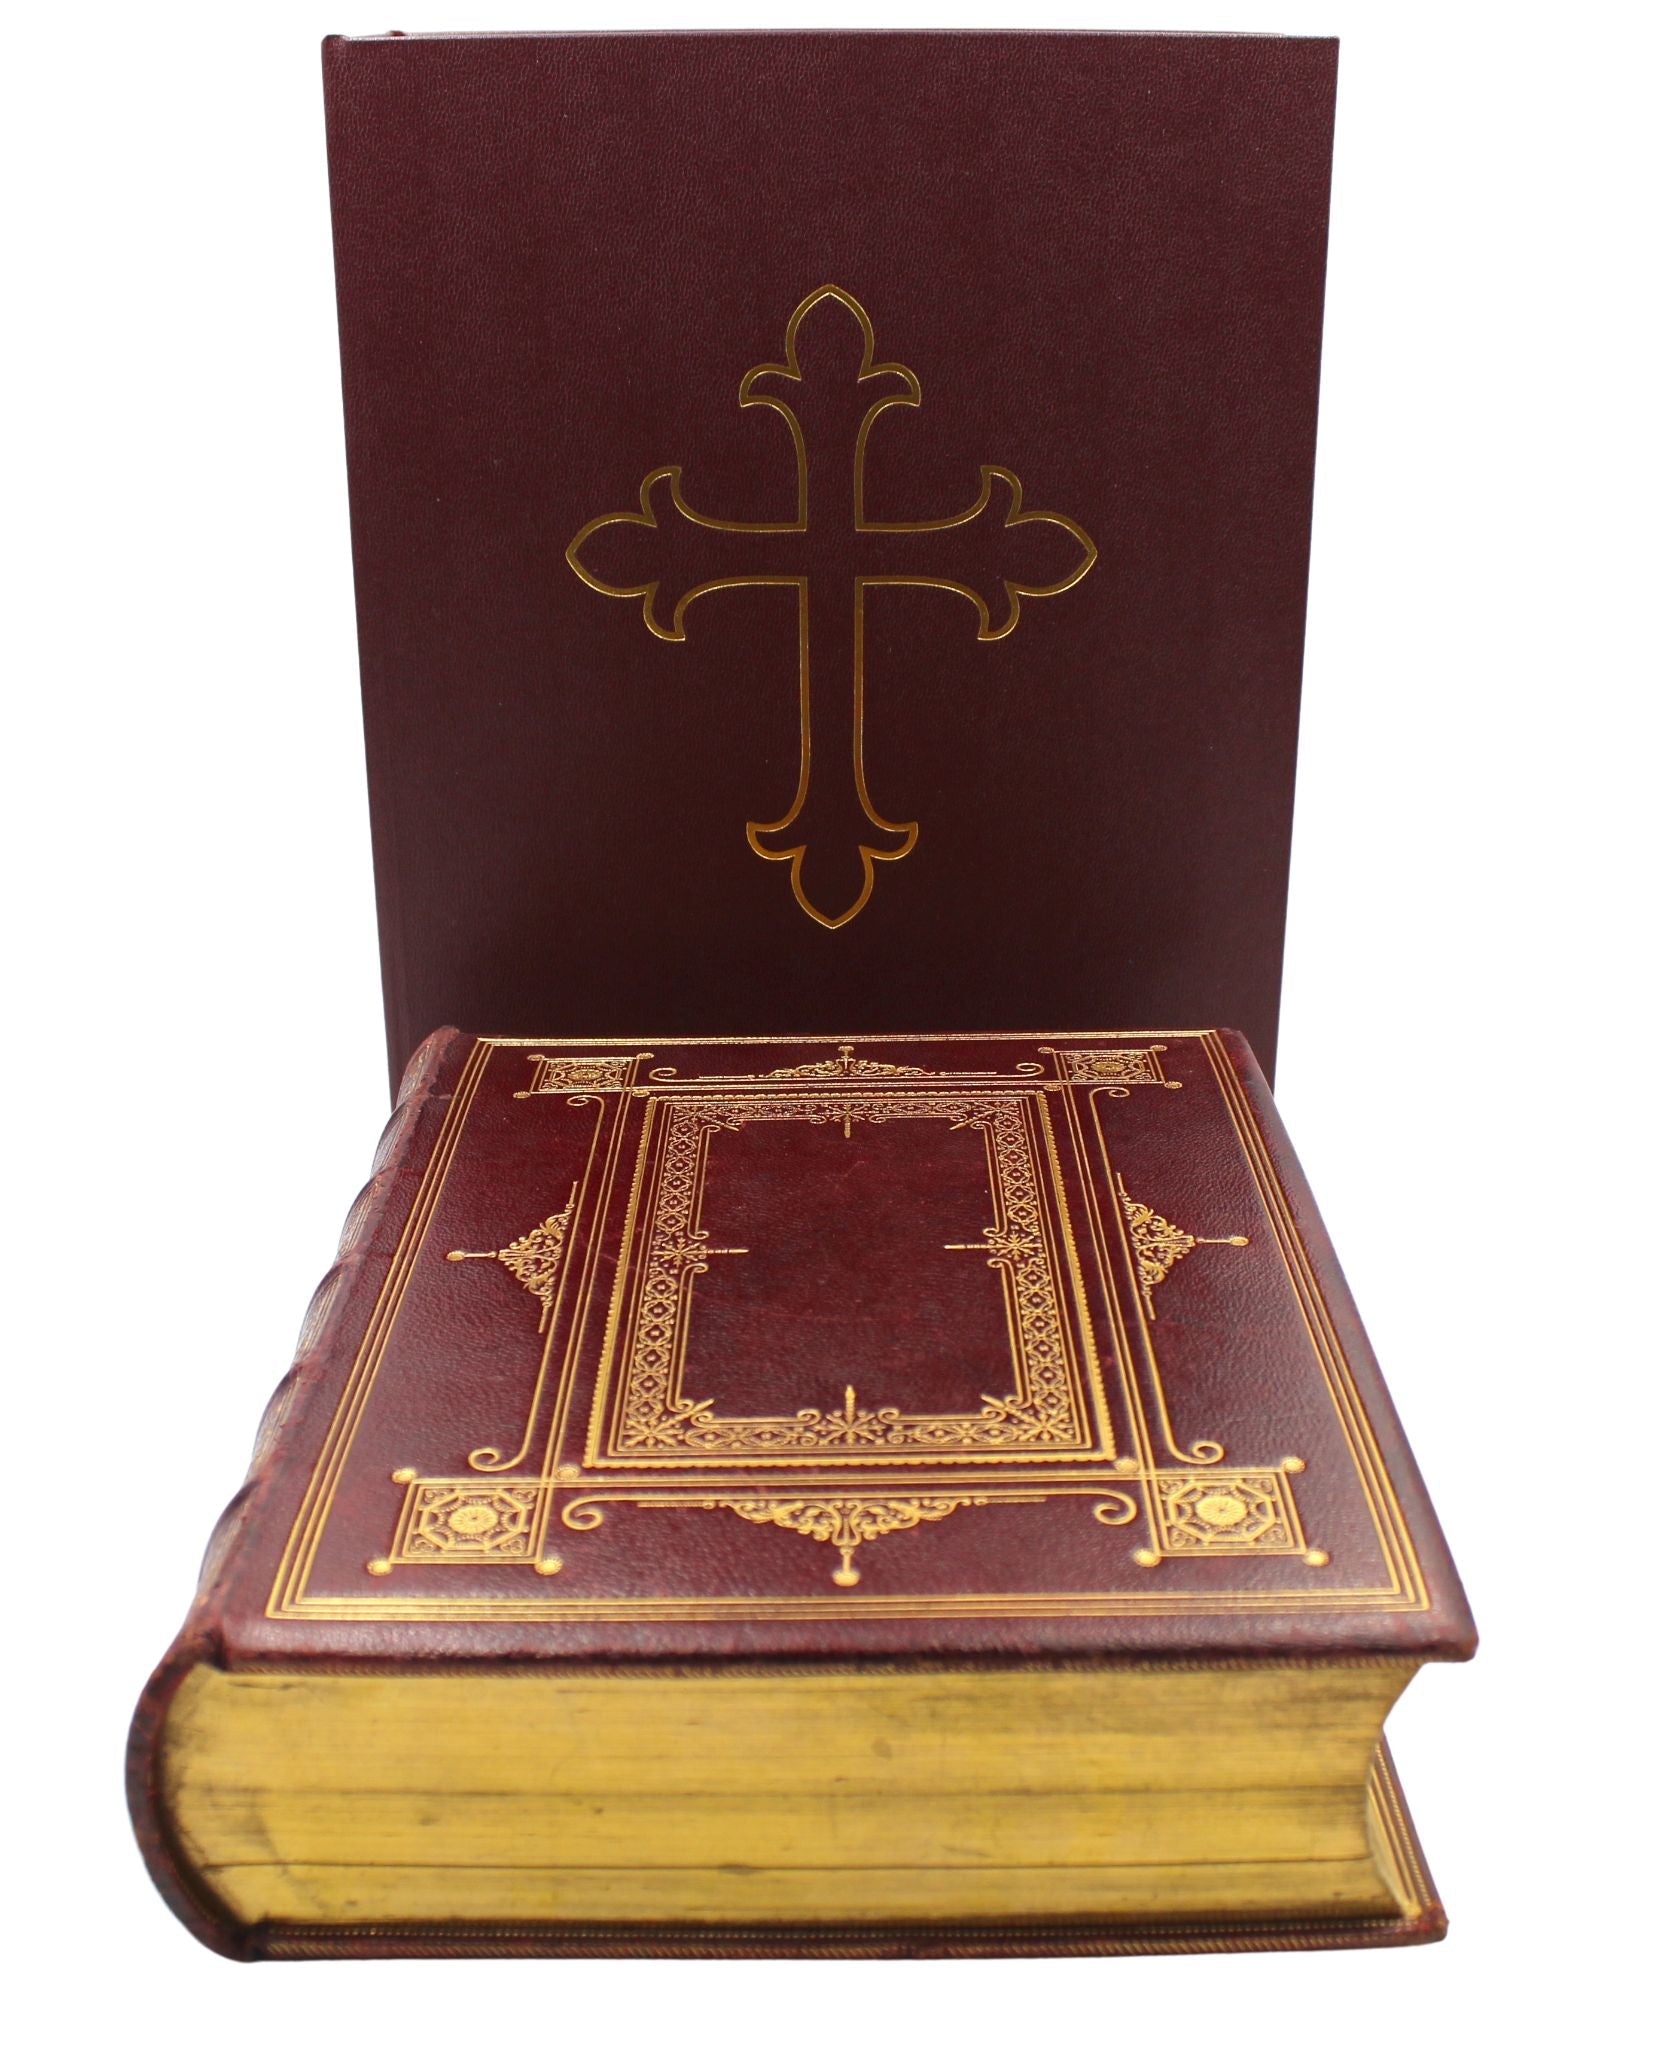 The Holy Bible, Containing the Old and New Testaments, Appointed to be Read in Churches, 1887 - The Great Republic